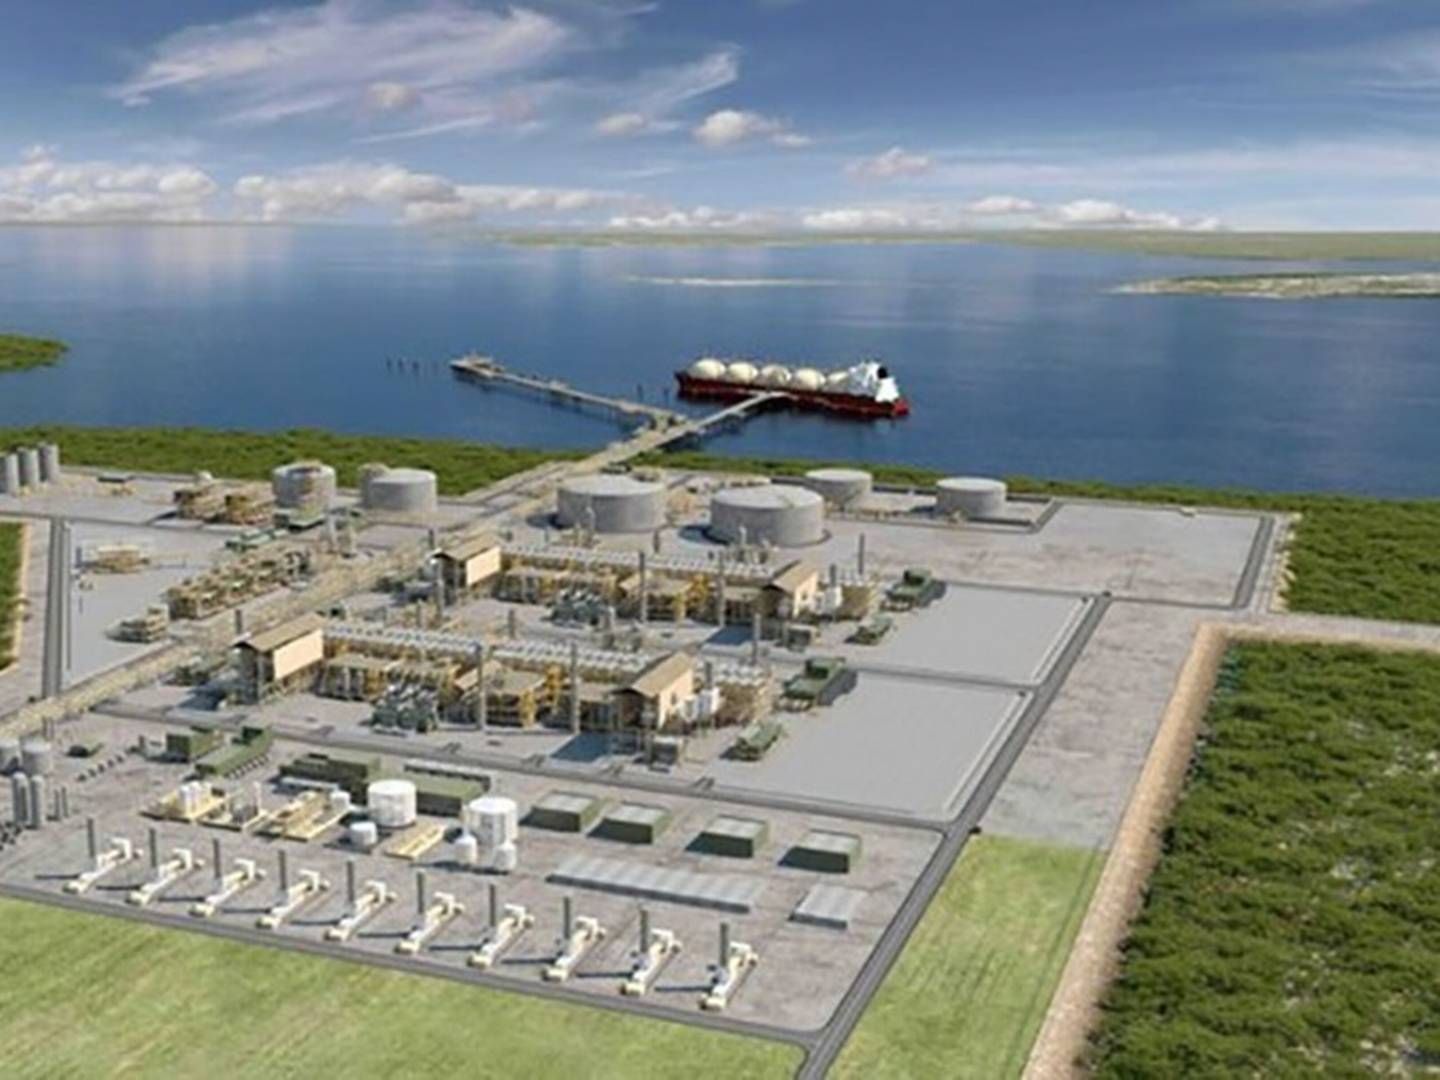 Investments in gas projects in Mozambique lead to human rights violations, a Swedish civil society network claims. | Photo: Mozambique Lng